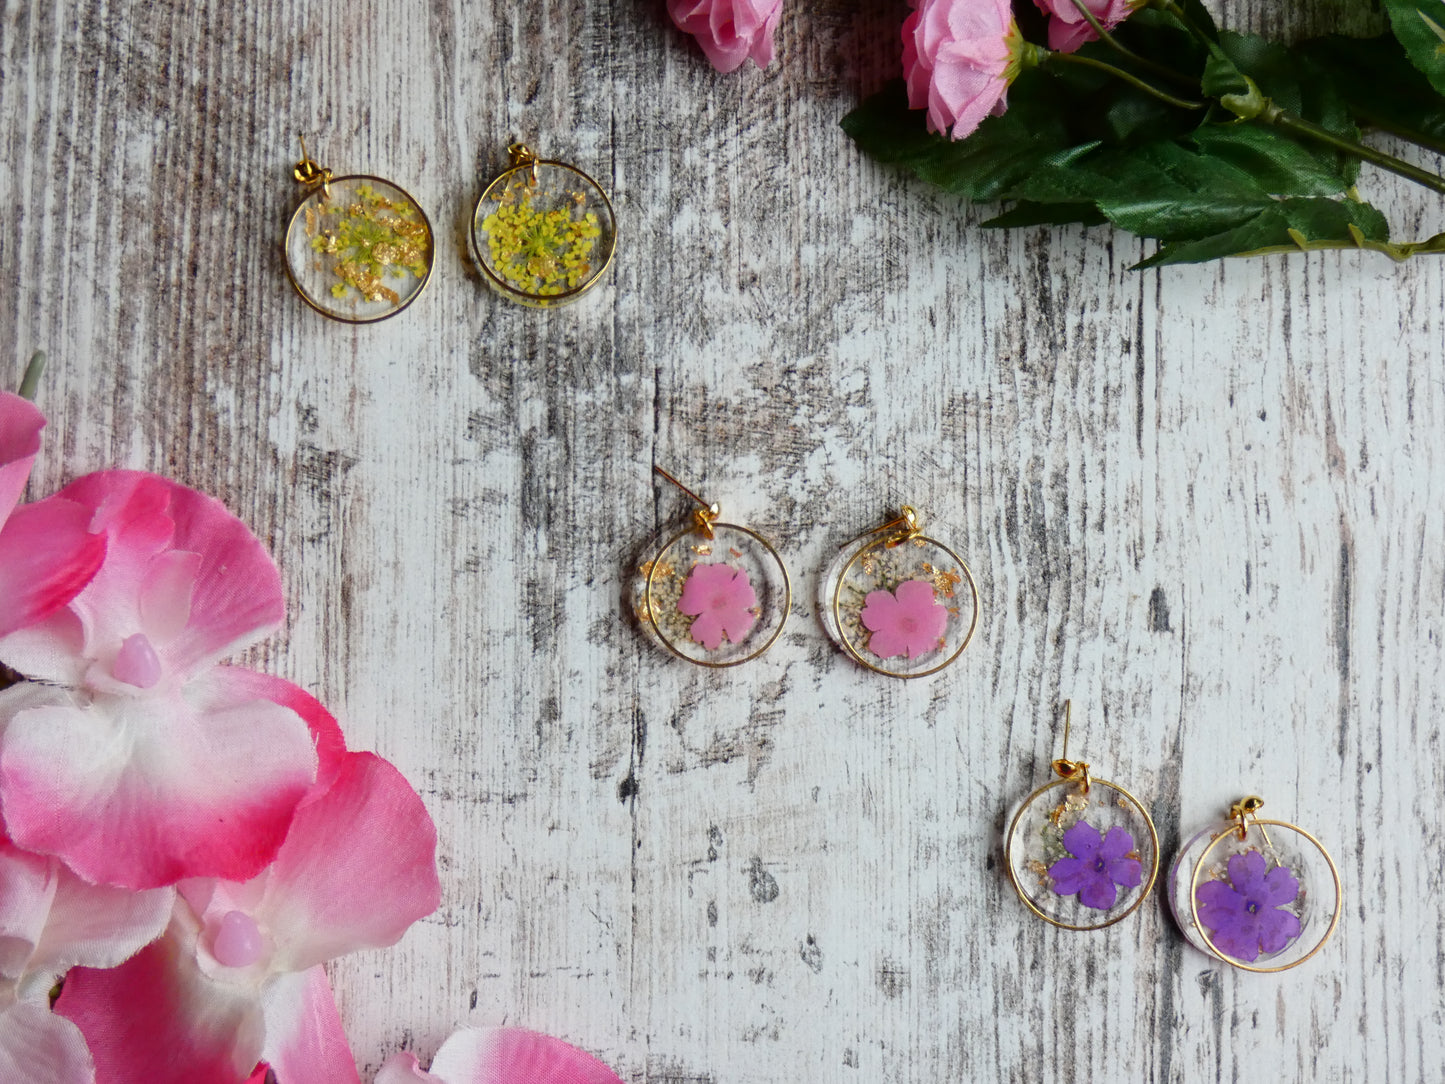 Flower circle earrings with gold accent